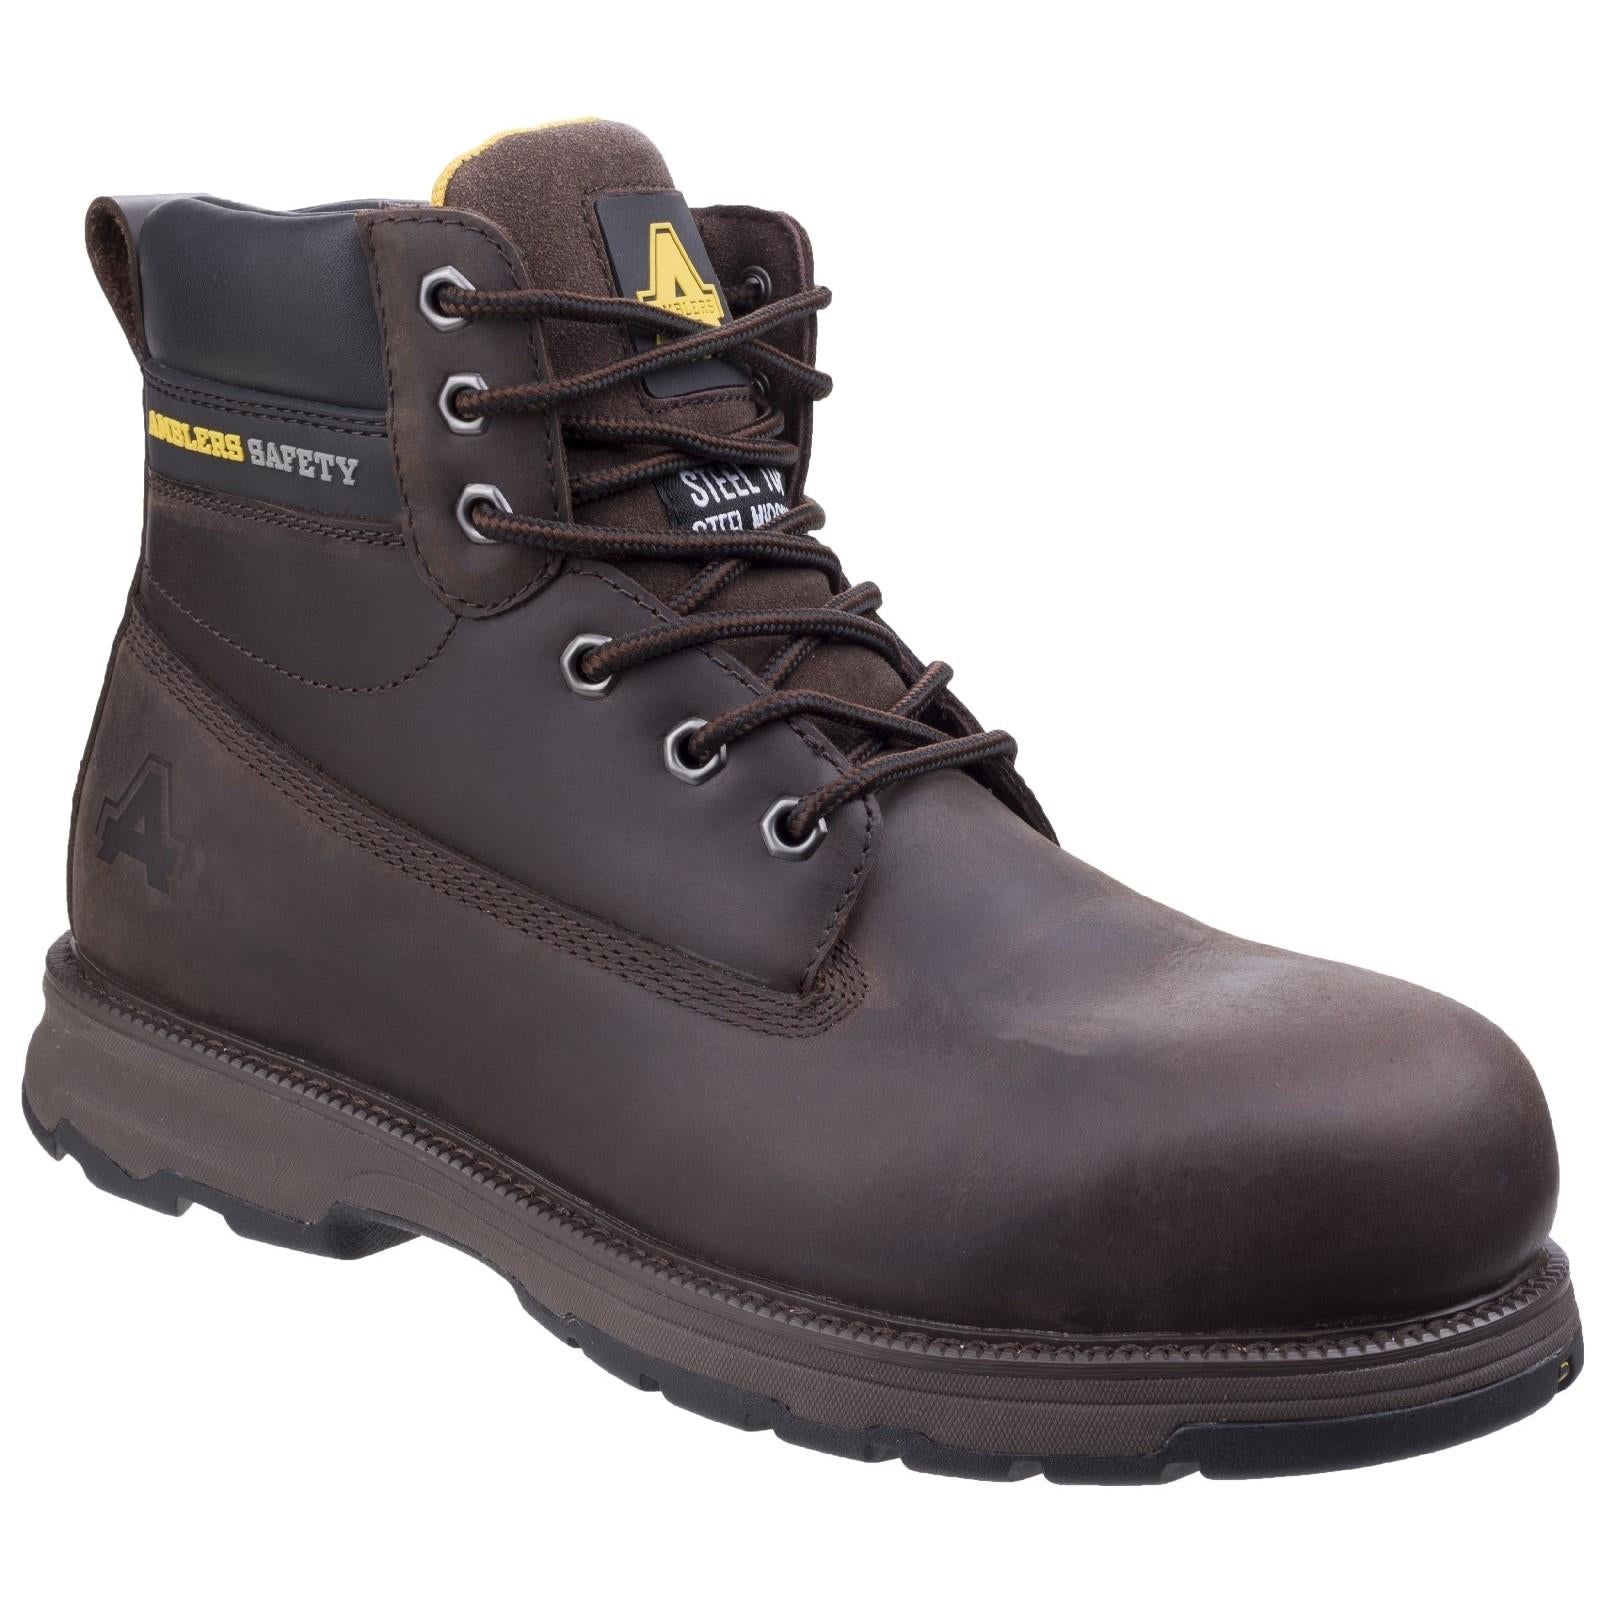 Amblers AS170 Wentwood S1P brown leather steel toe/midsole work safety boots